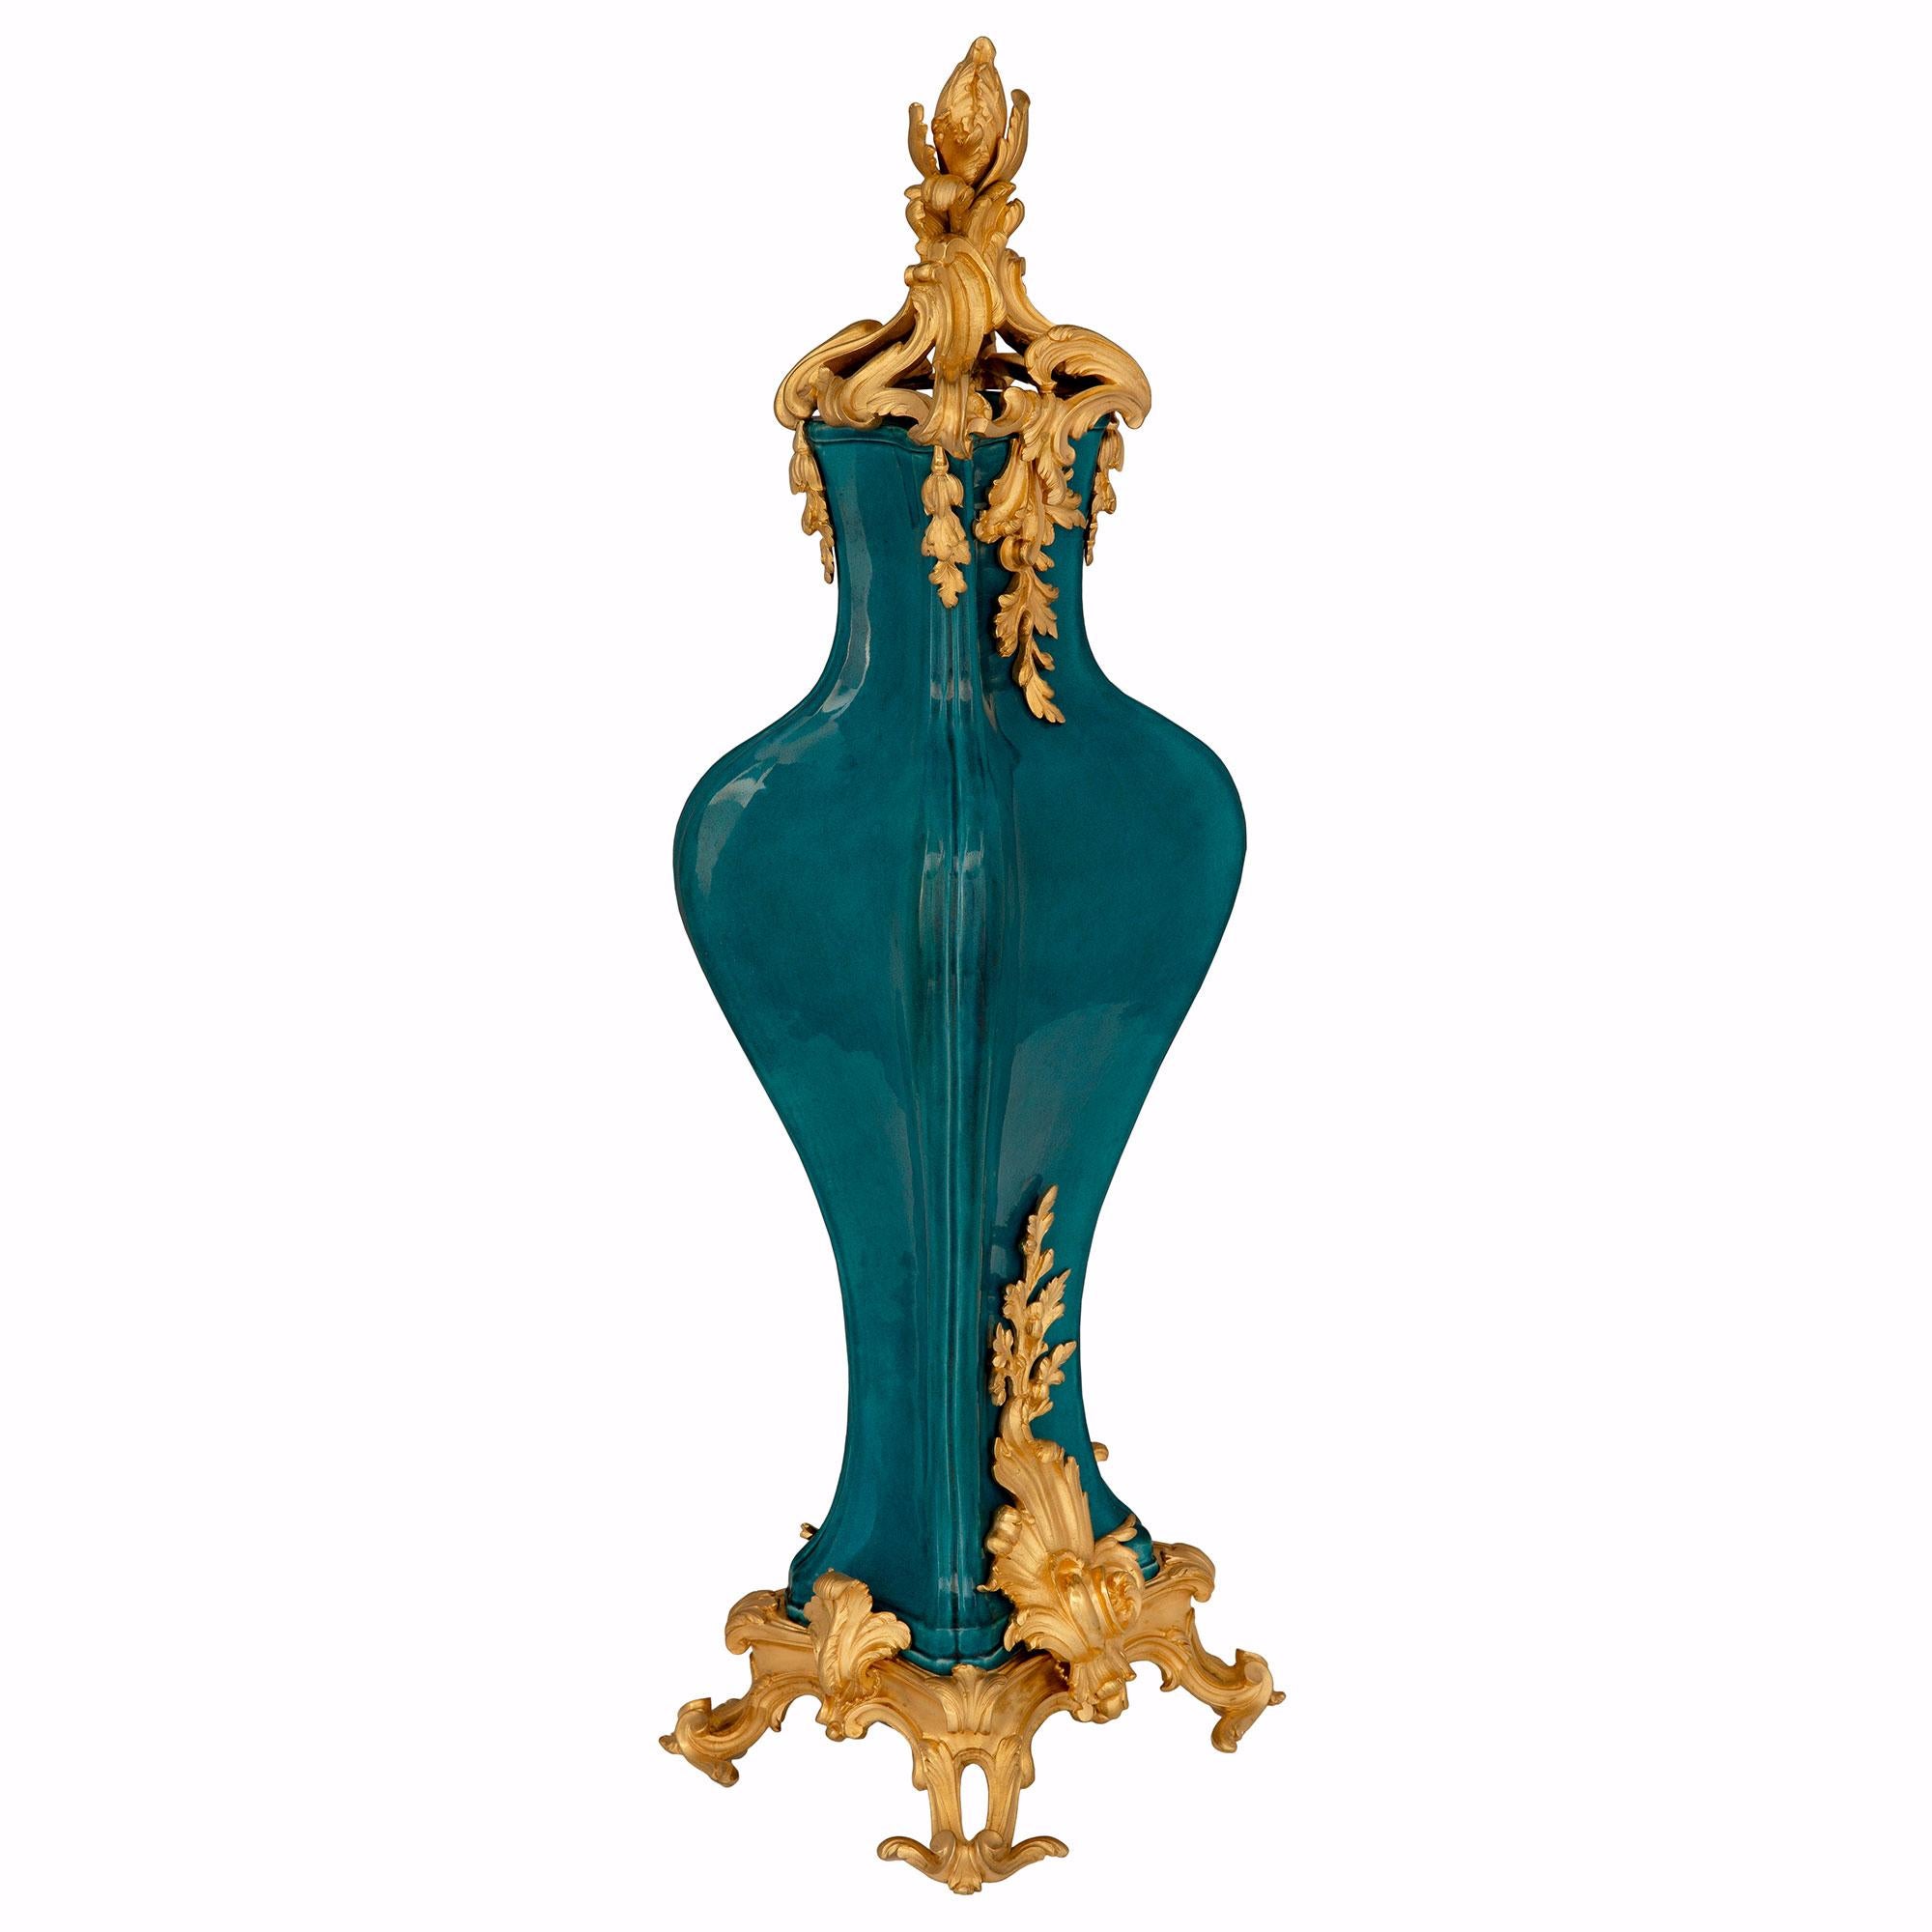 A sensational and large scale true pair of French 19th century Louis XV st. Belle Époque period ormolu and porcelain vases, attributed to François Linke. Each lidded vase is raised by elegant pierced scrolled foliate feet below a luxuriant richly